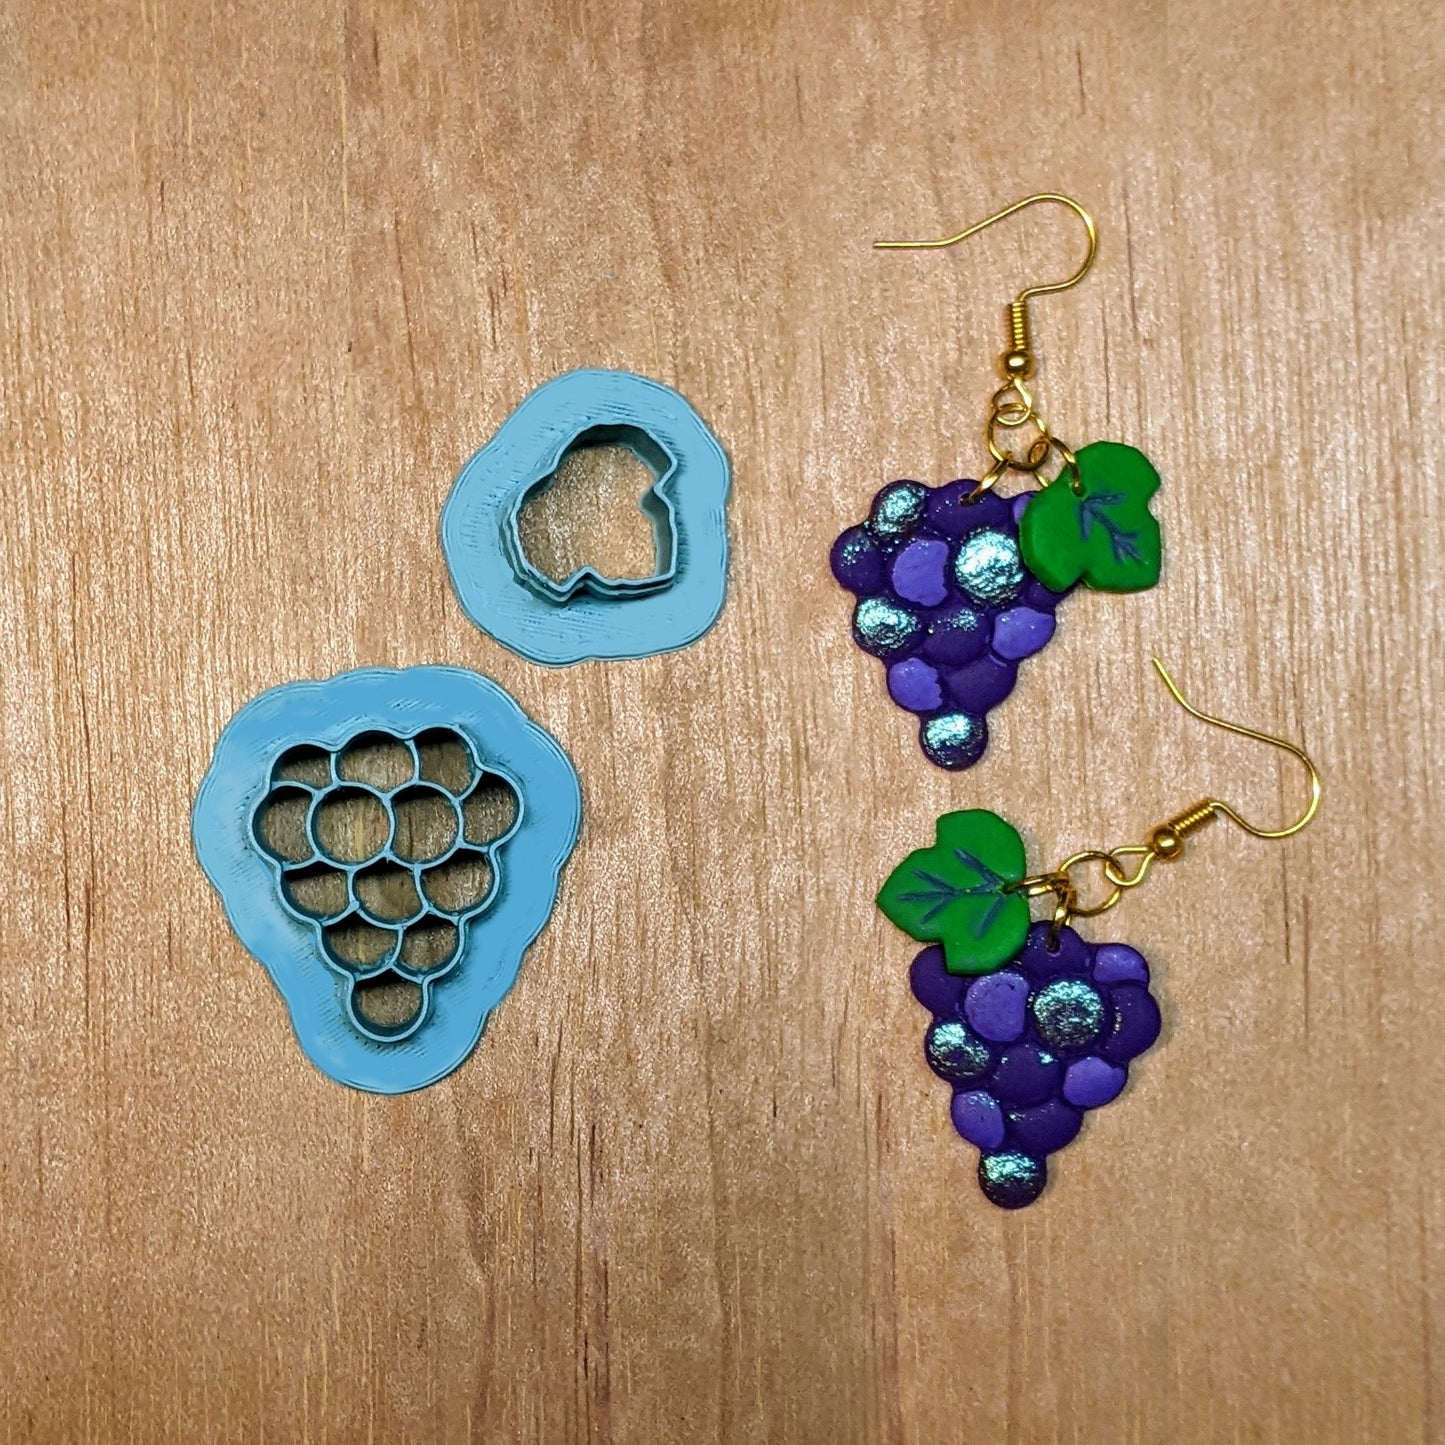 Grape and Grape Leaf 2-Piece Cookie Cutter Set - Ideal for Ceramics, Pottery, Cookies, Polymer Clay, Fondant, and More